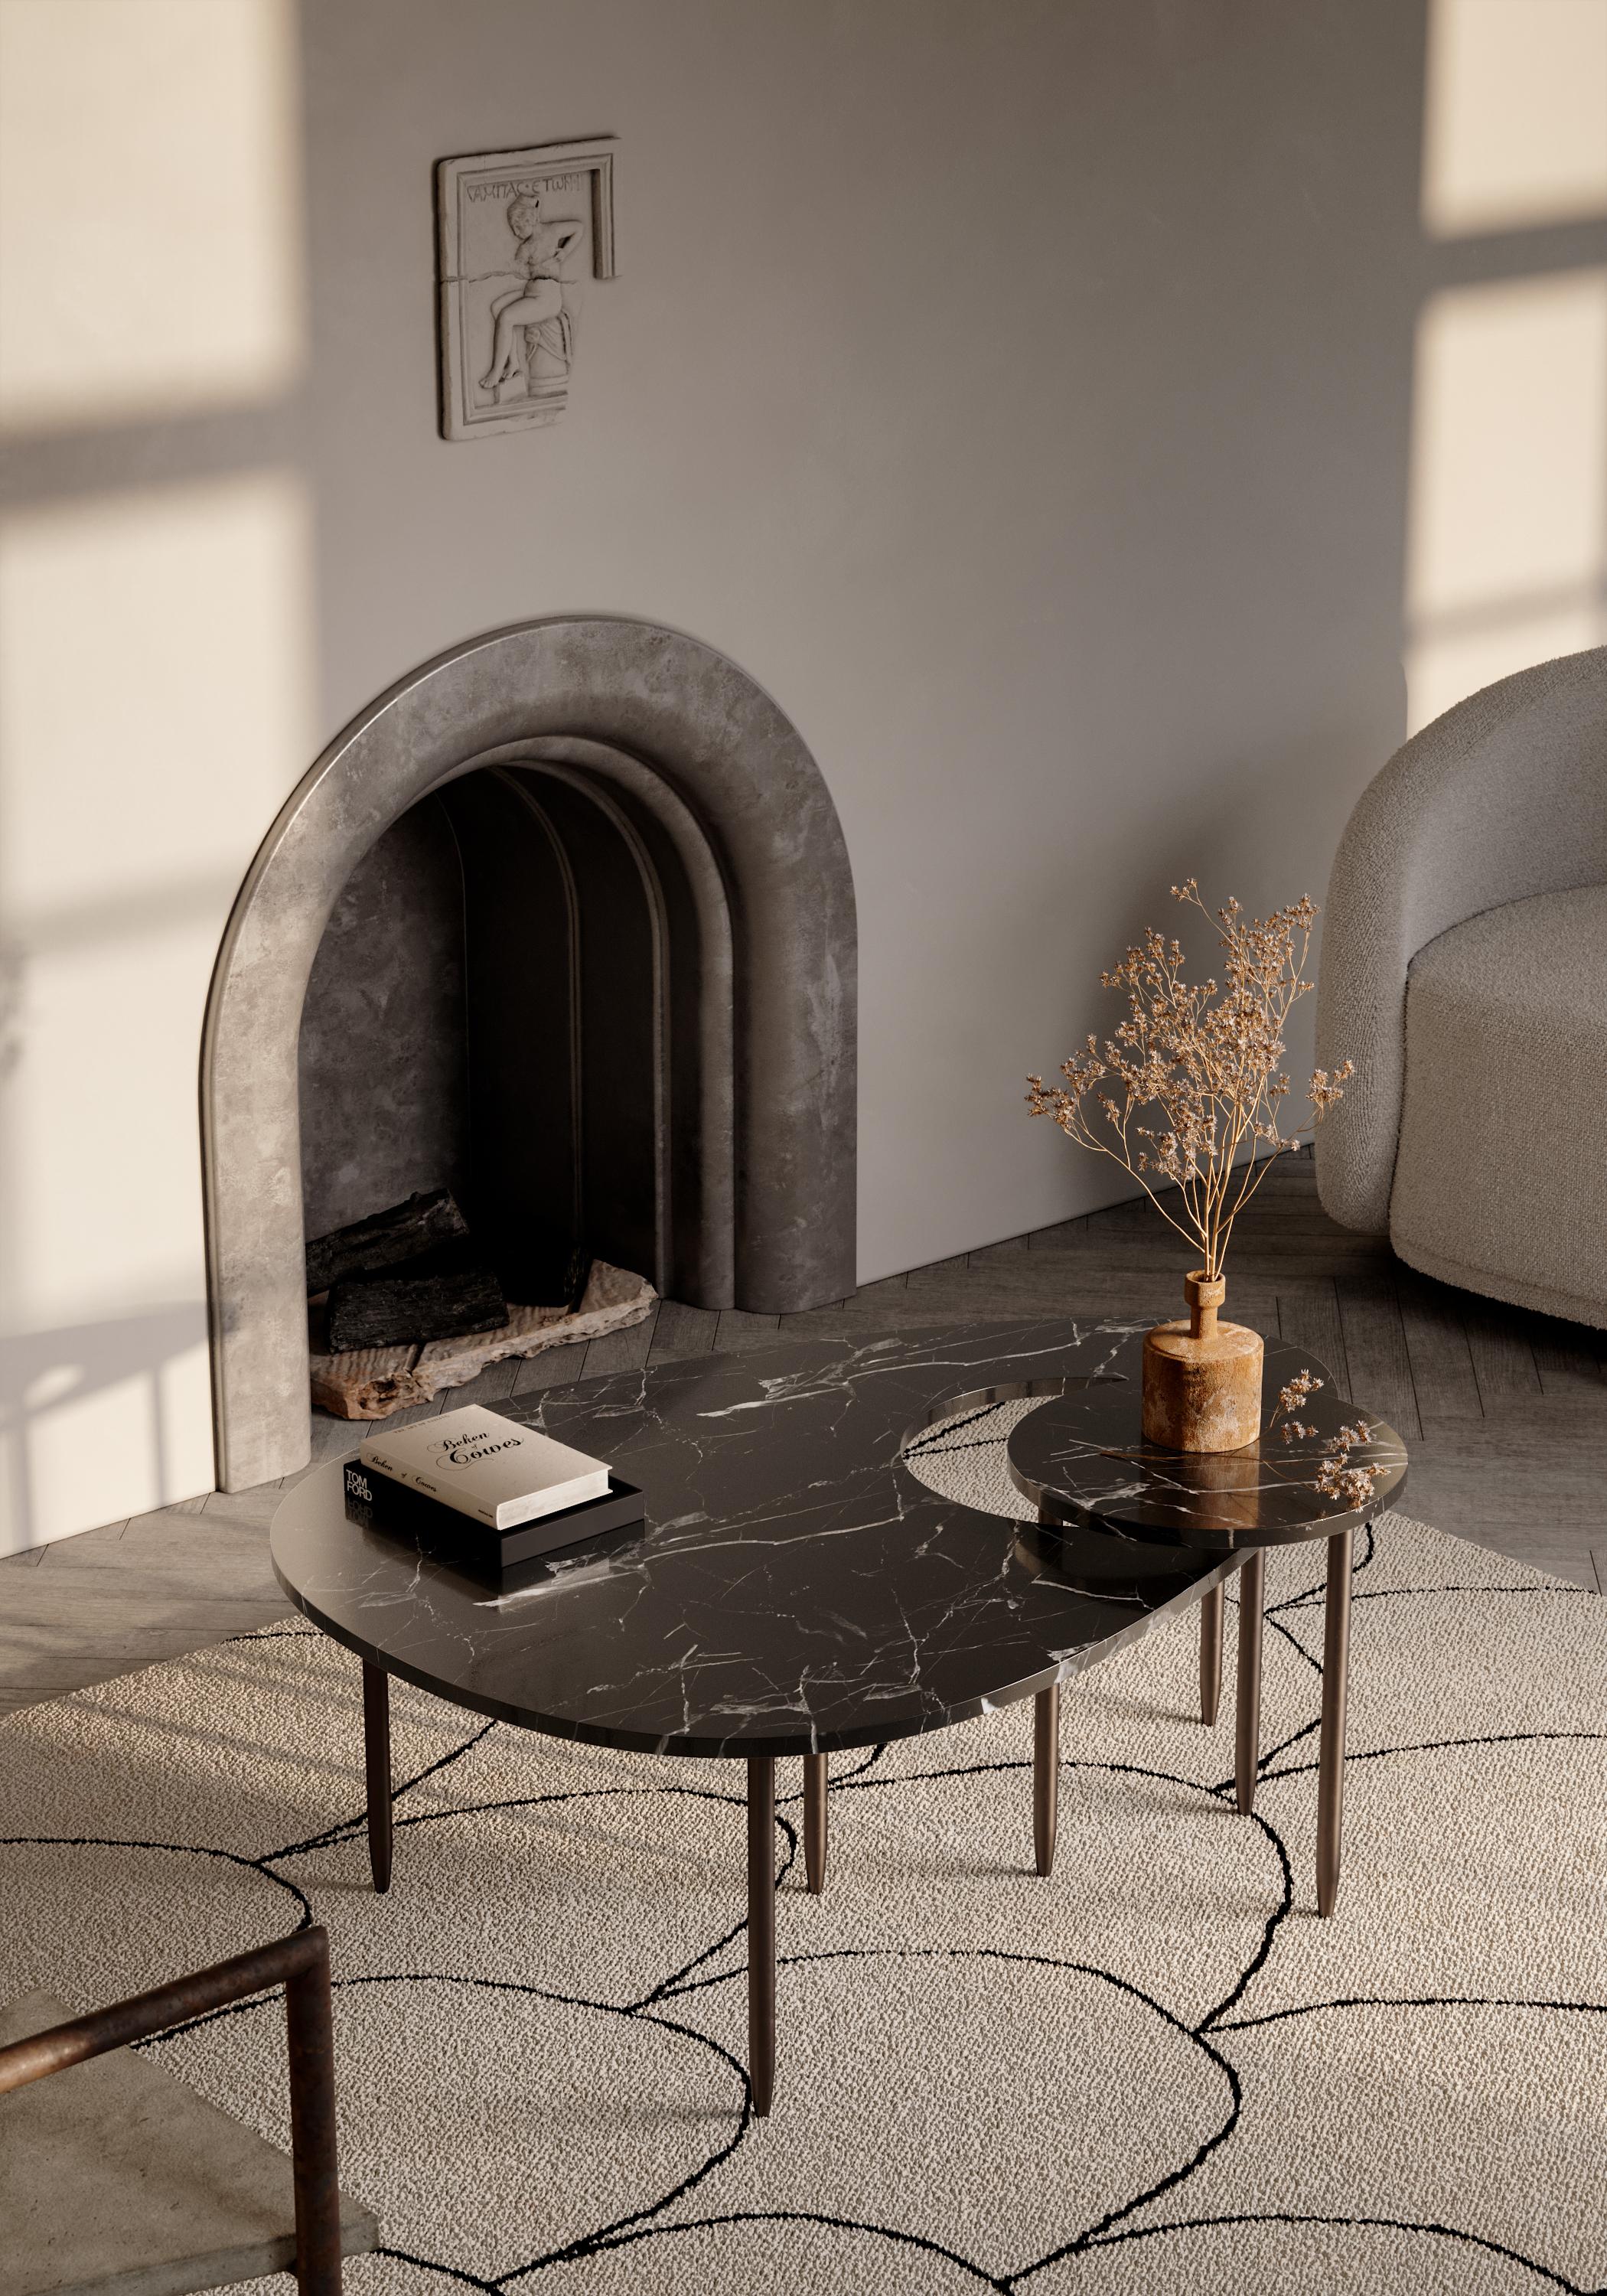 Inspired by our midnight muse, our contemporary marble table with an interconnecting smaller table floating on linear legs. Placed in the night sky, a soft reflection of the moon lights up a path, creating an illuminating display of art on the